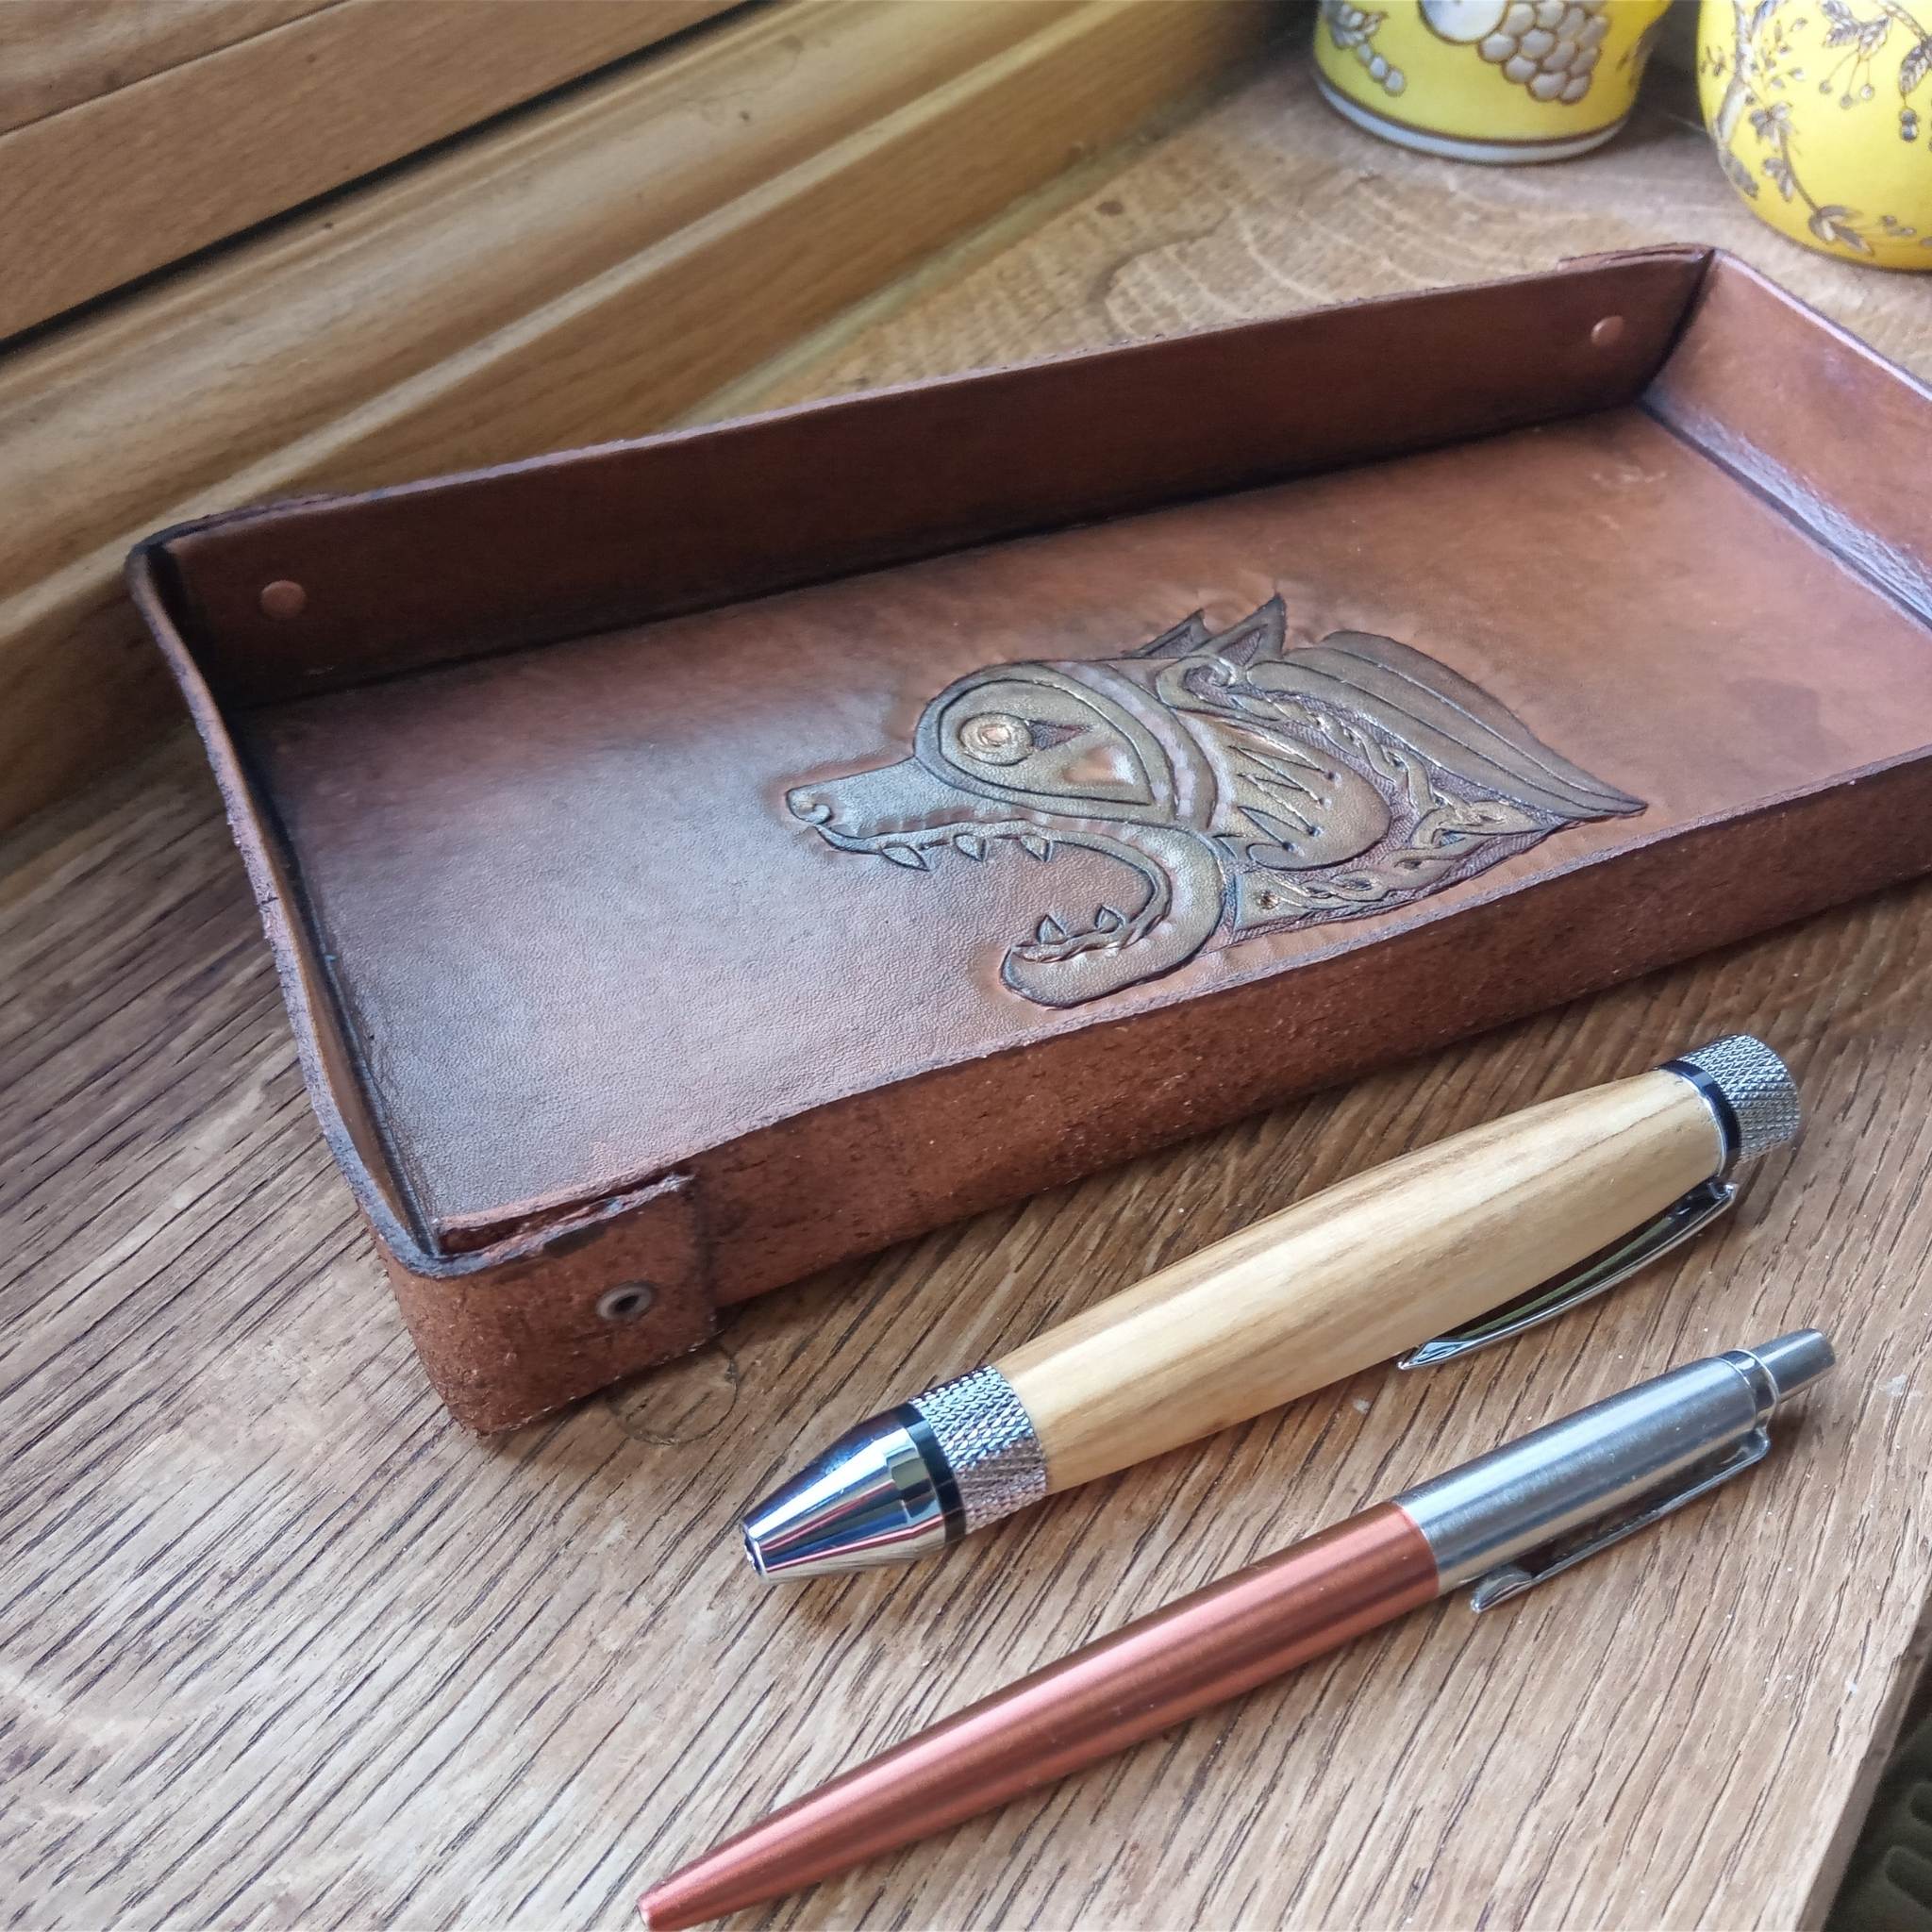 Project to make a leather box tray using the v-gouge handtool (included), pack contains the materials, instructions and a free carving template.